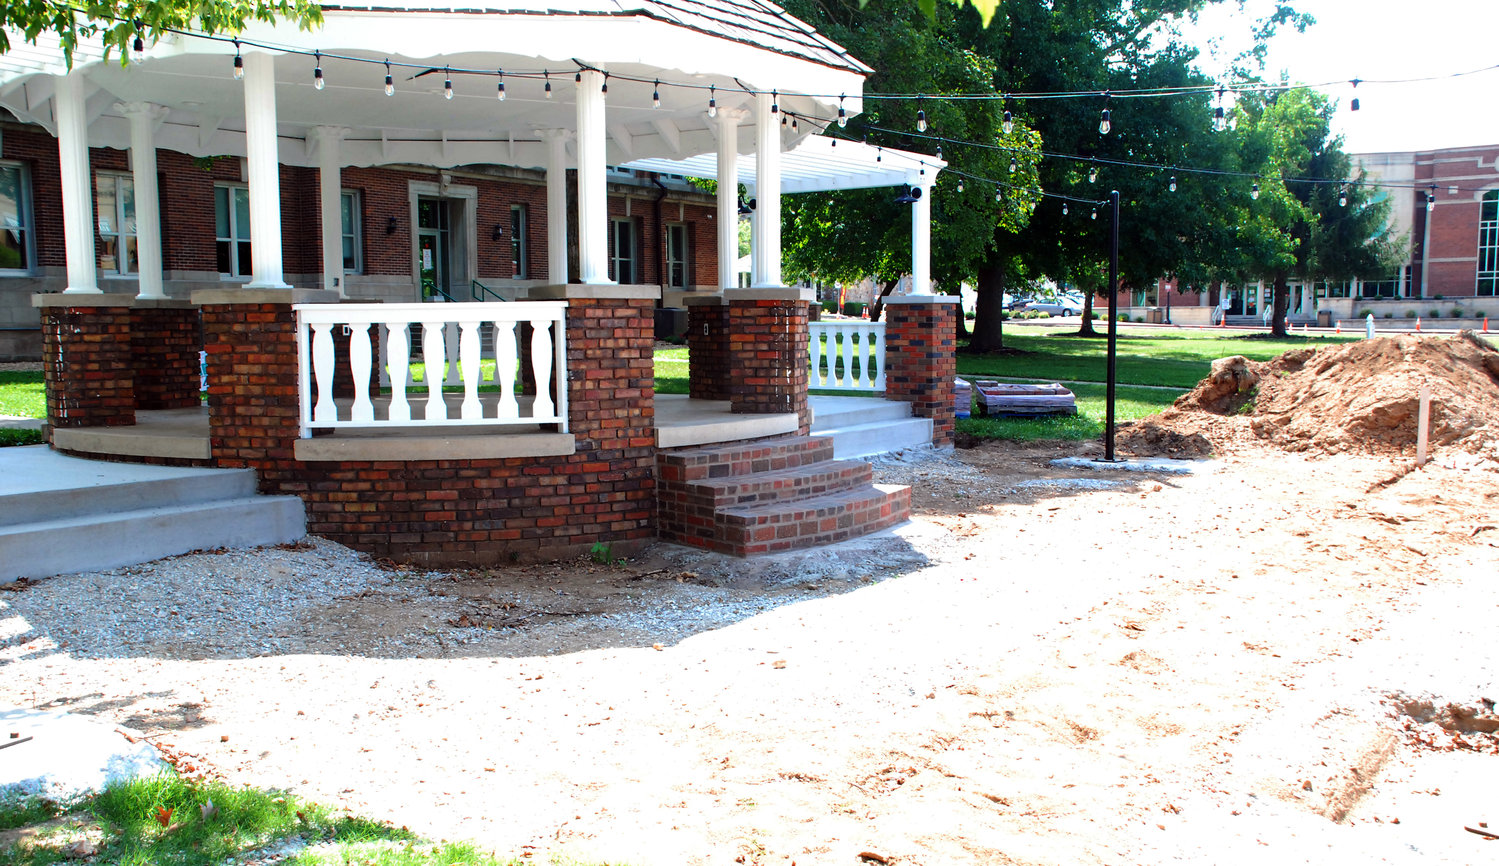 A NEW SIDEWALK is being built alongside the expanded gazebo on the west side of the Ozark square on North Second Street.